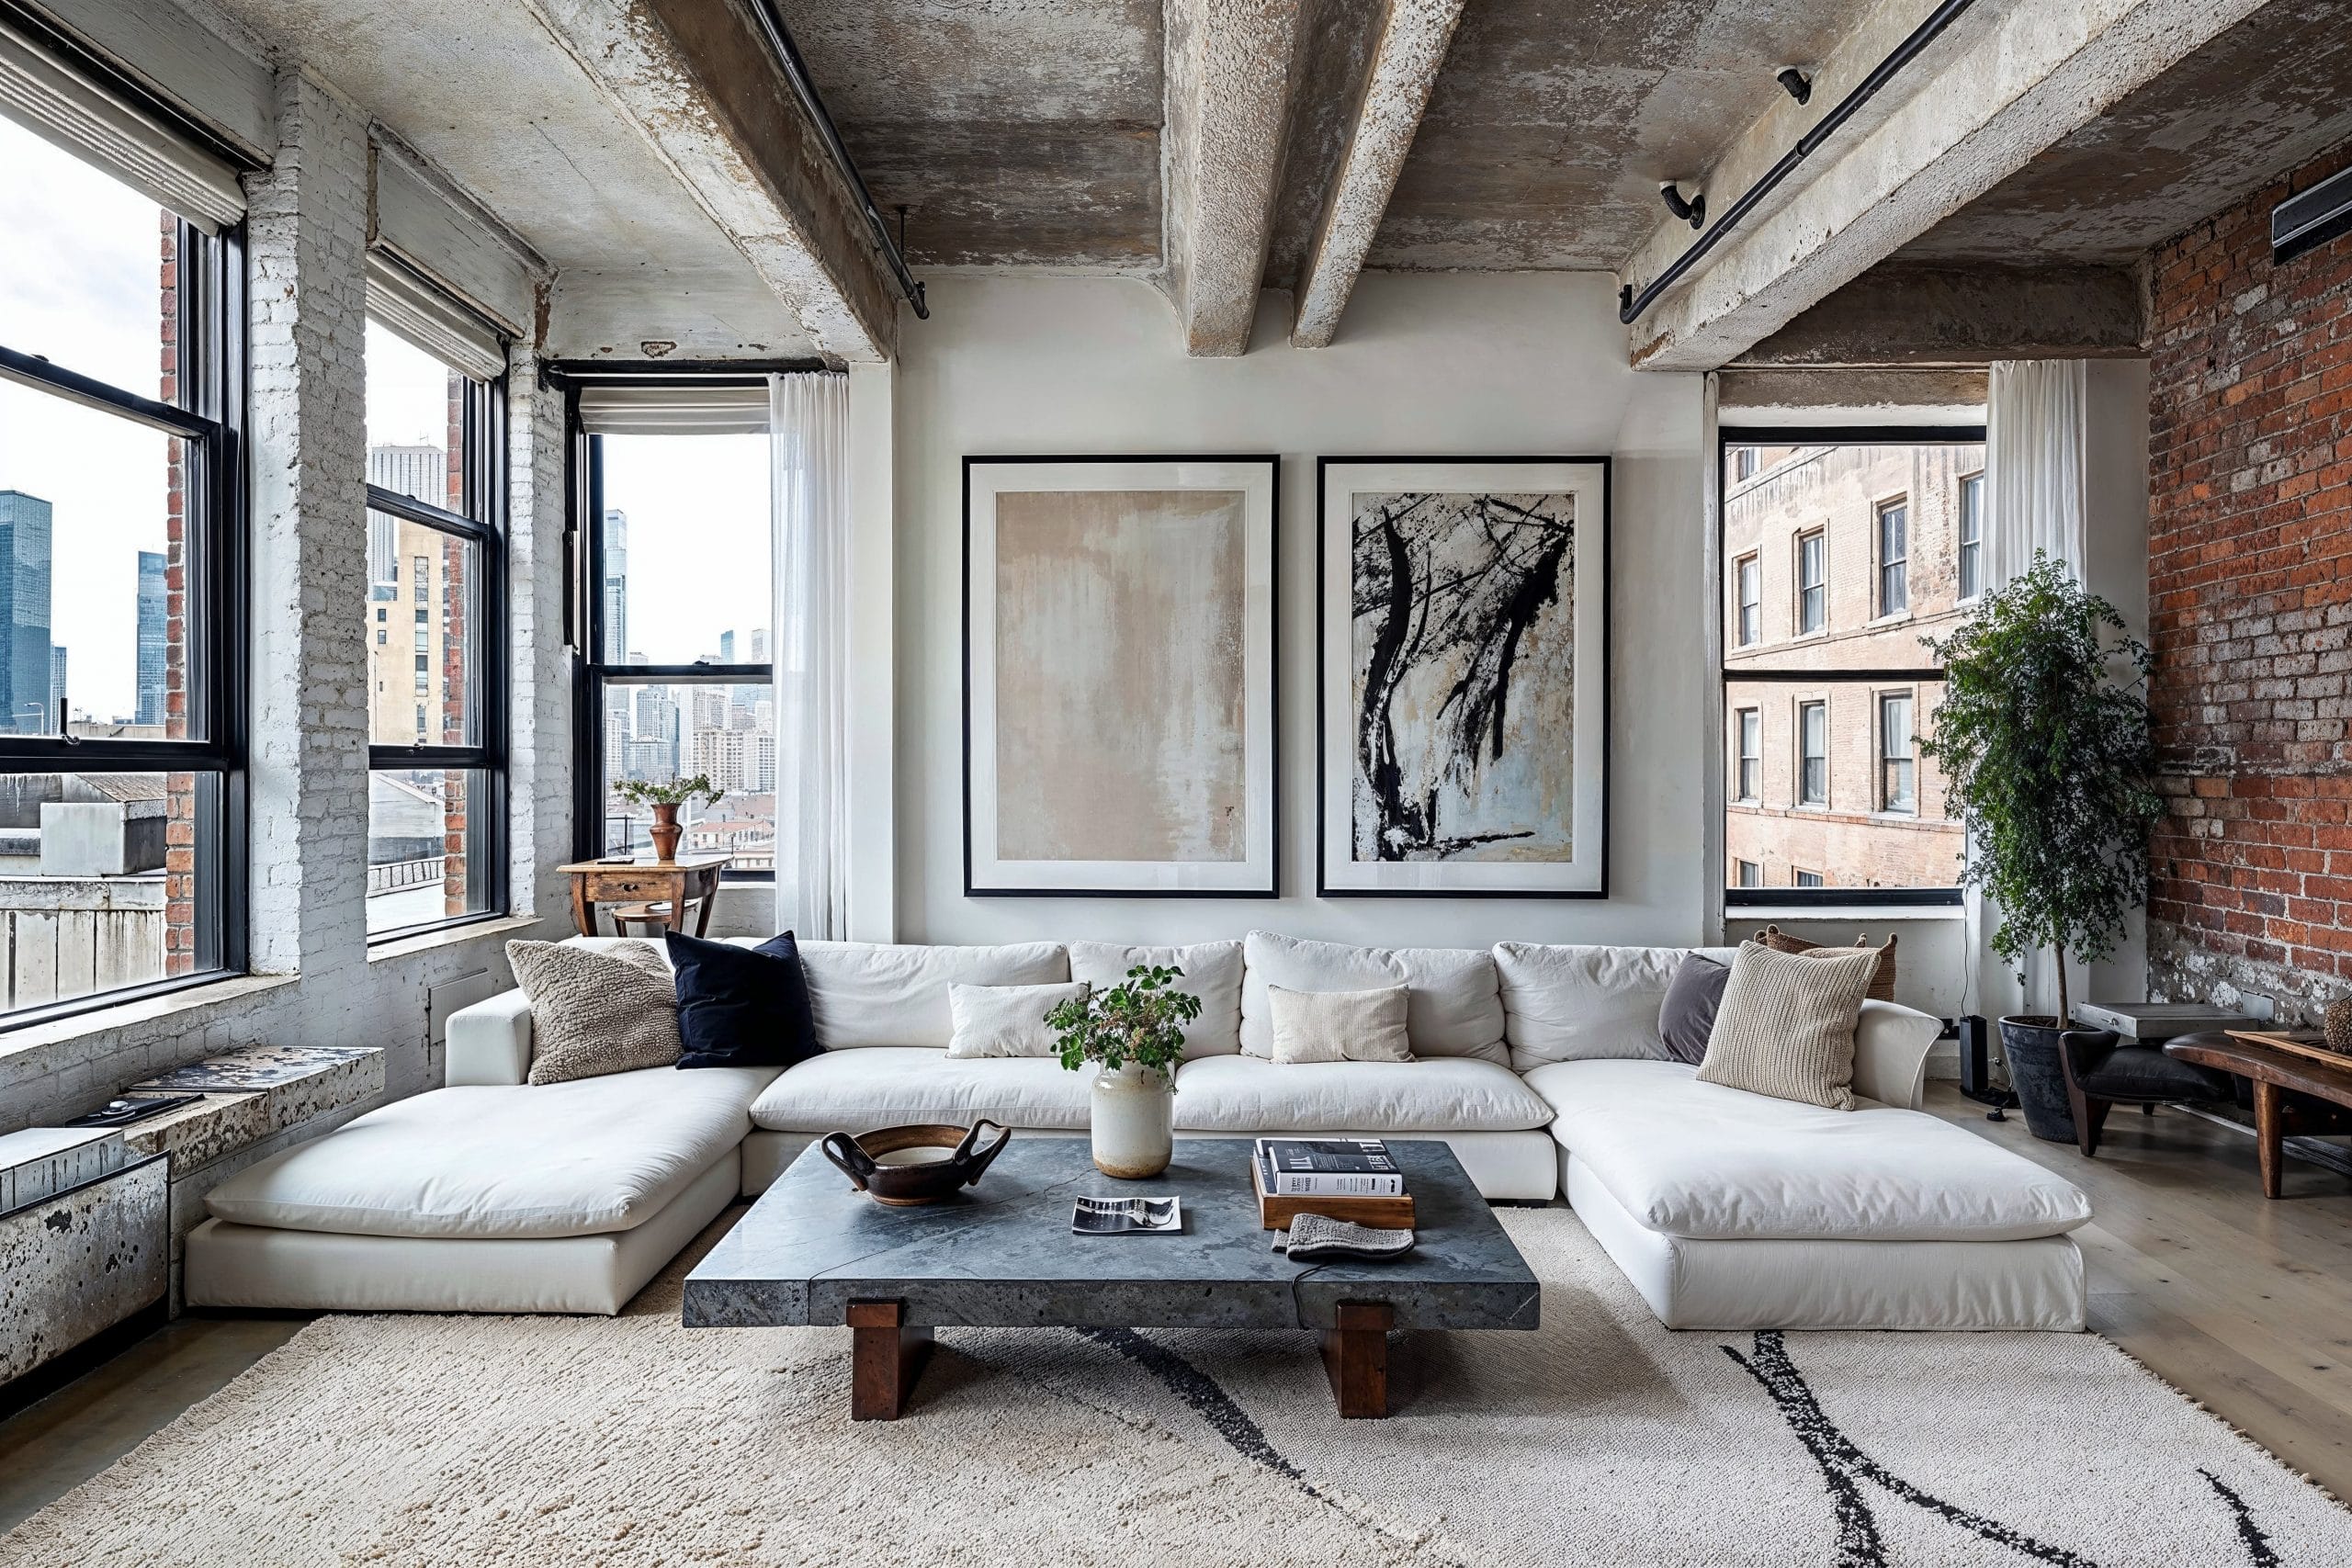 Industrial Chic Transforming Your Home with Raw Elements